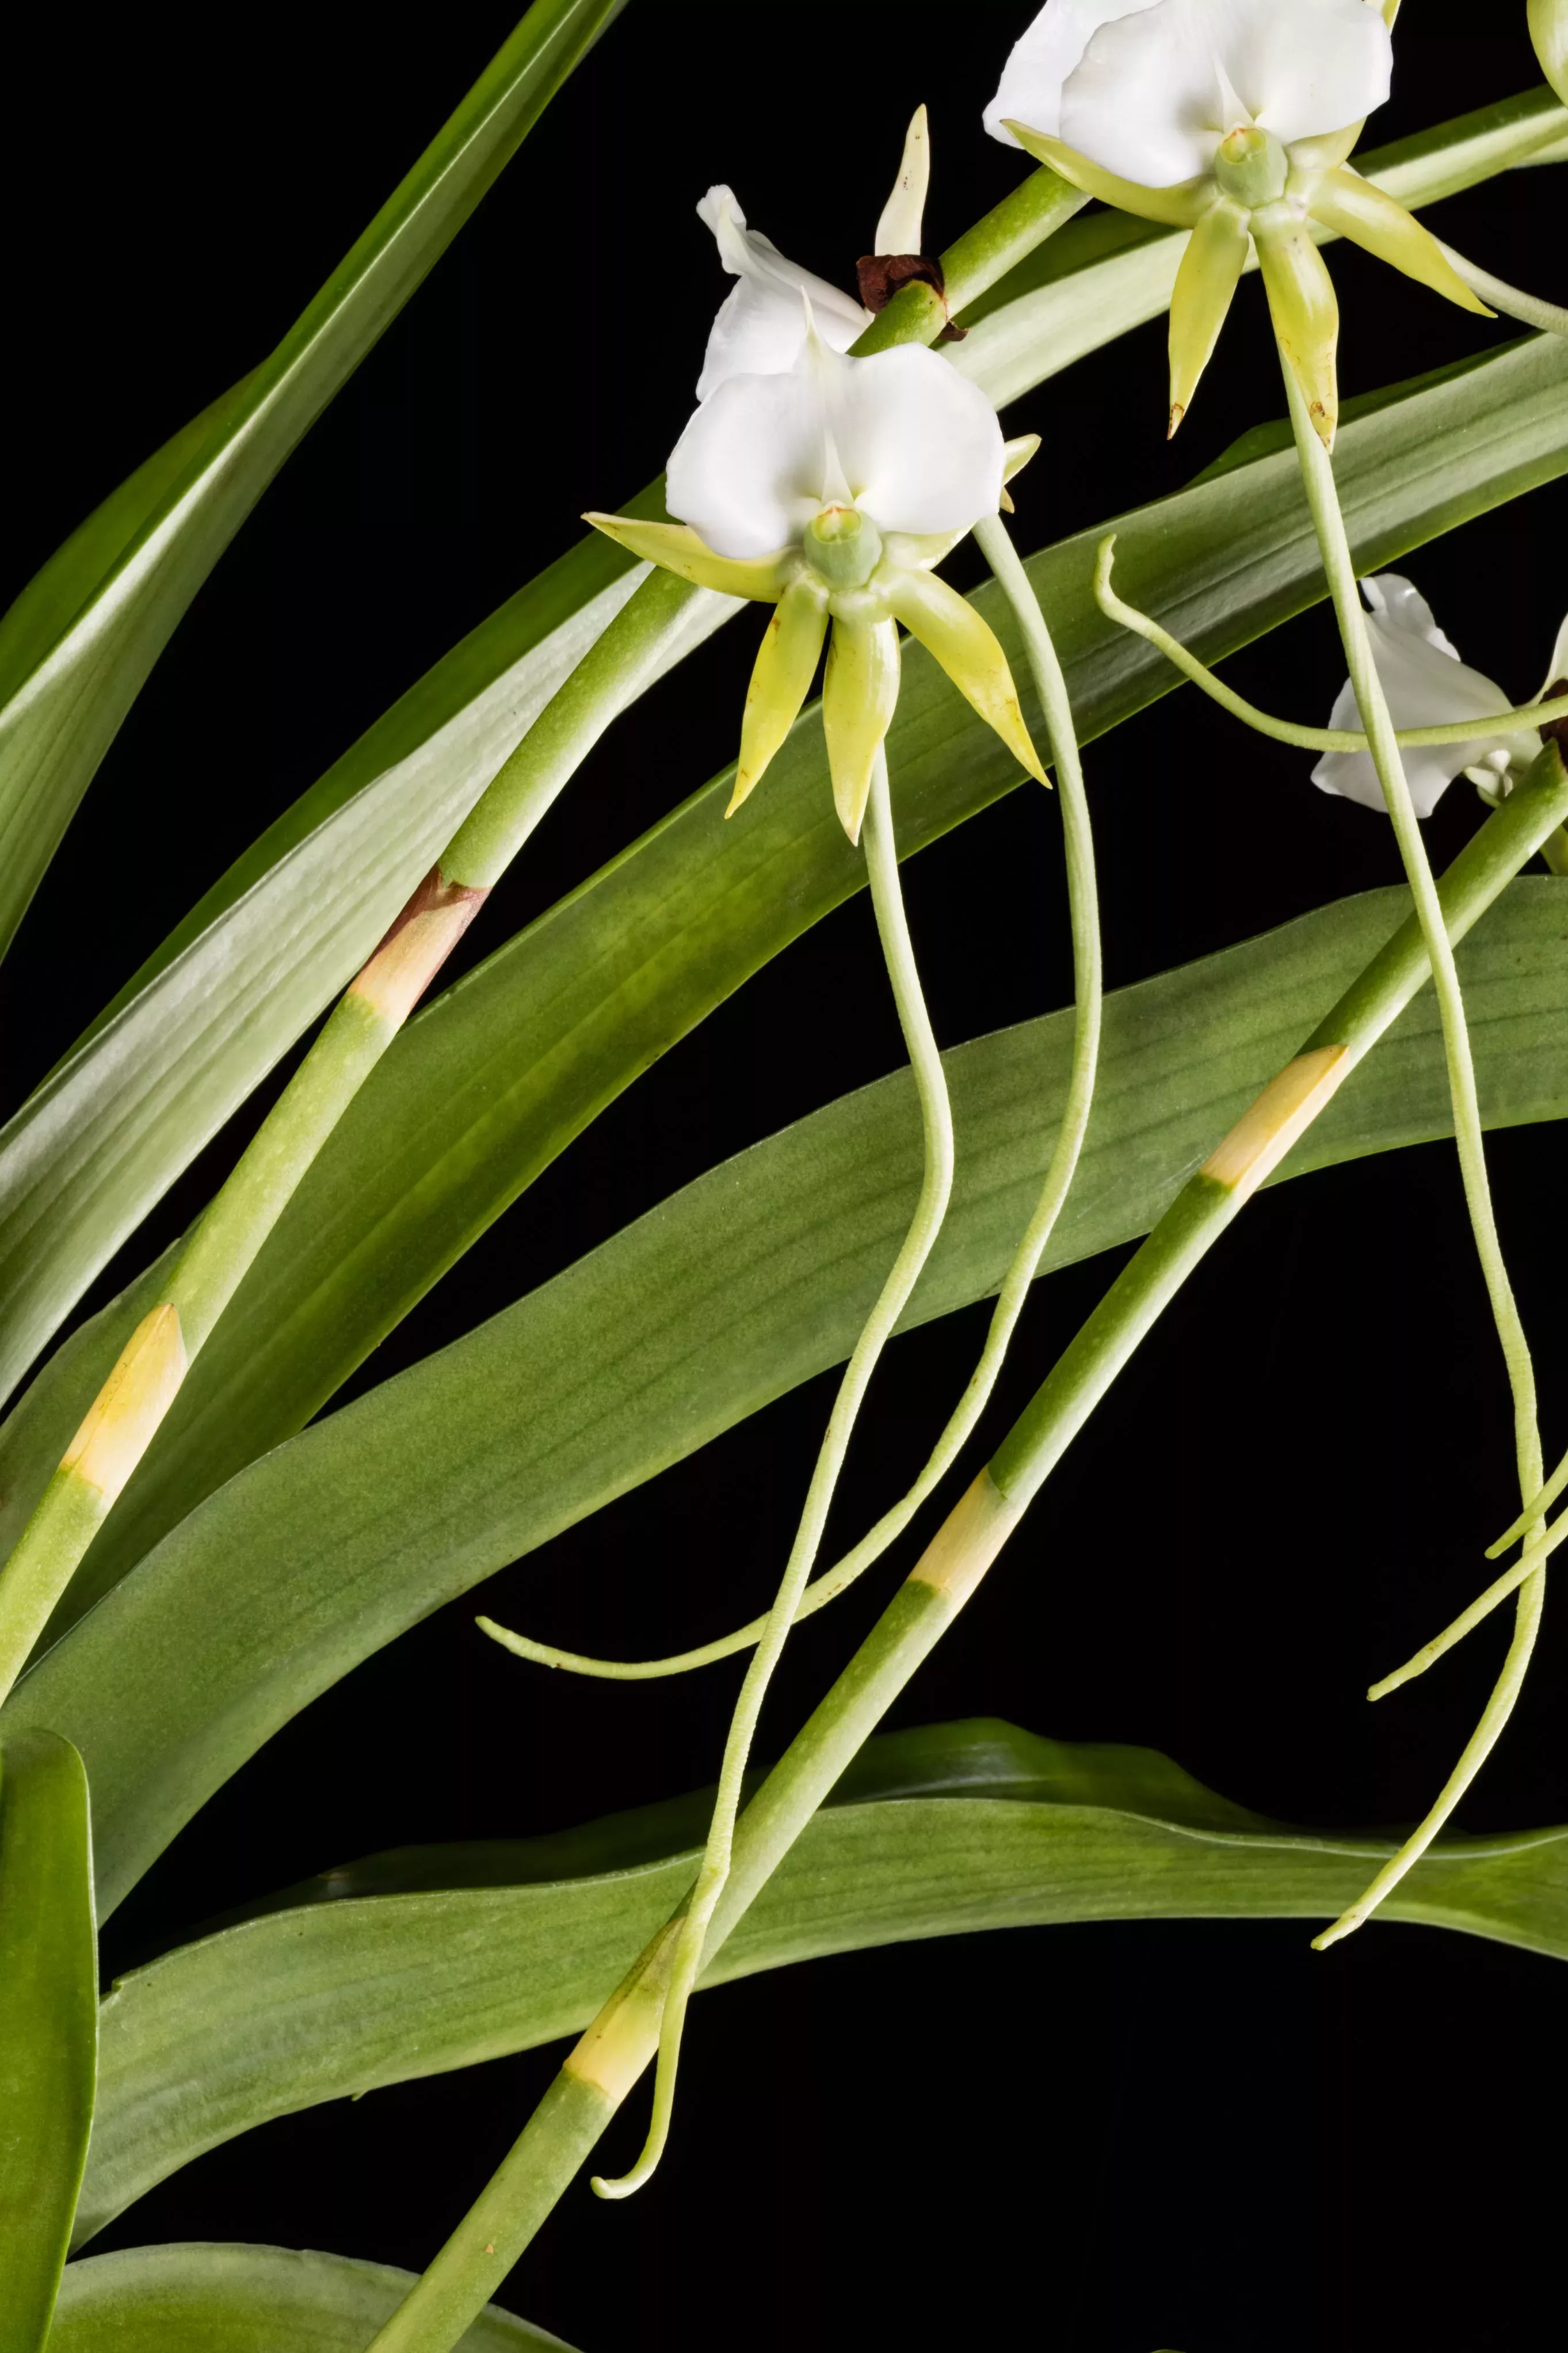 Orchid with long green leaves and white flowers against a black backdrop